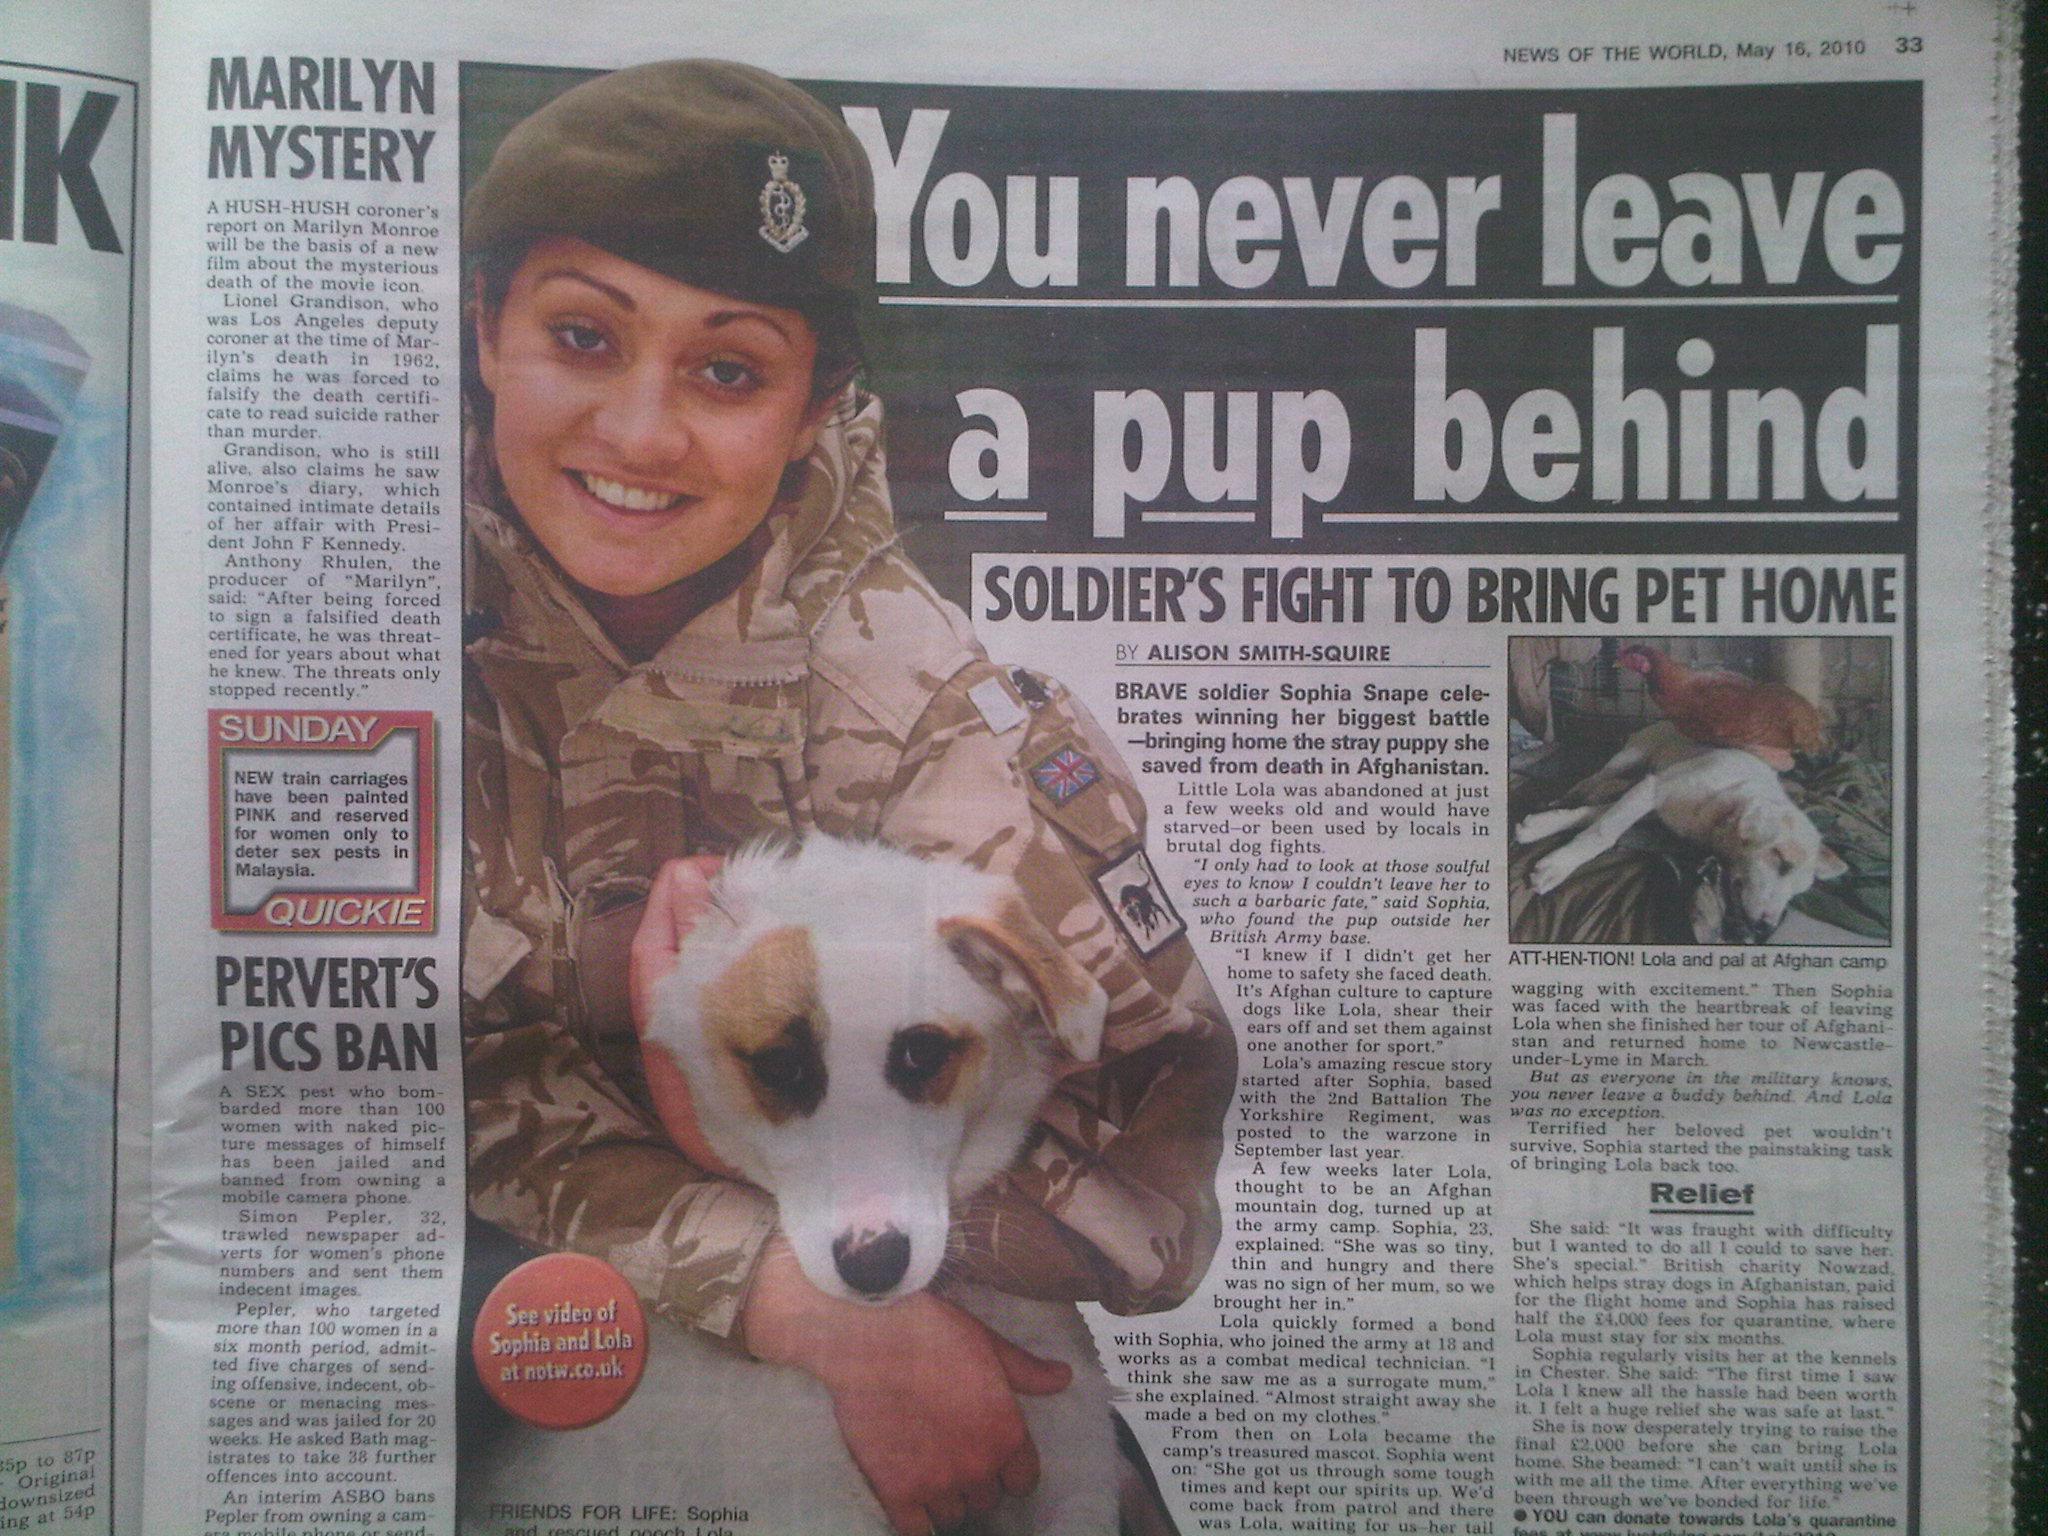 Soldier's fight to bring pup home - sold to News of the World